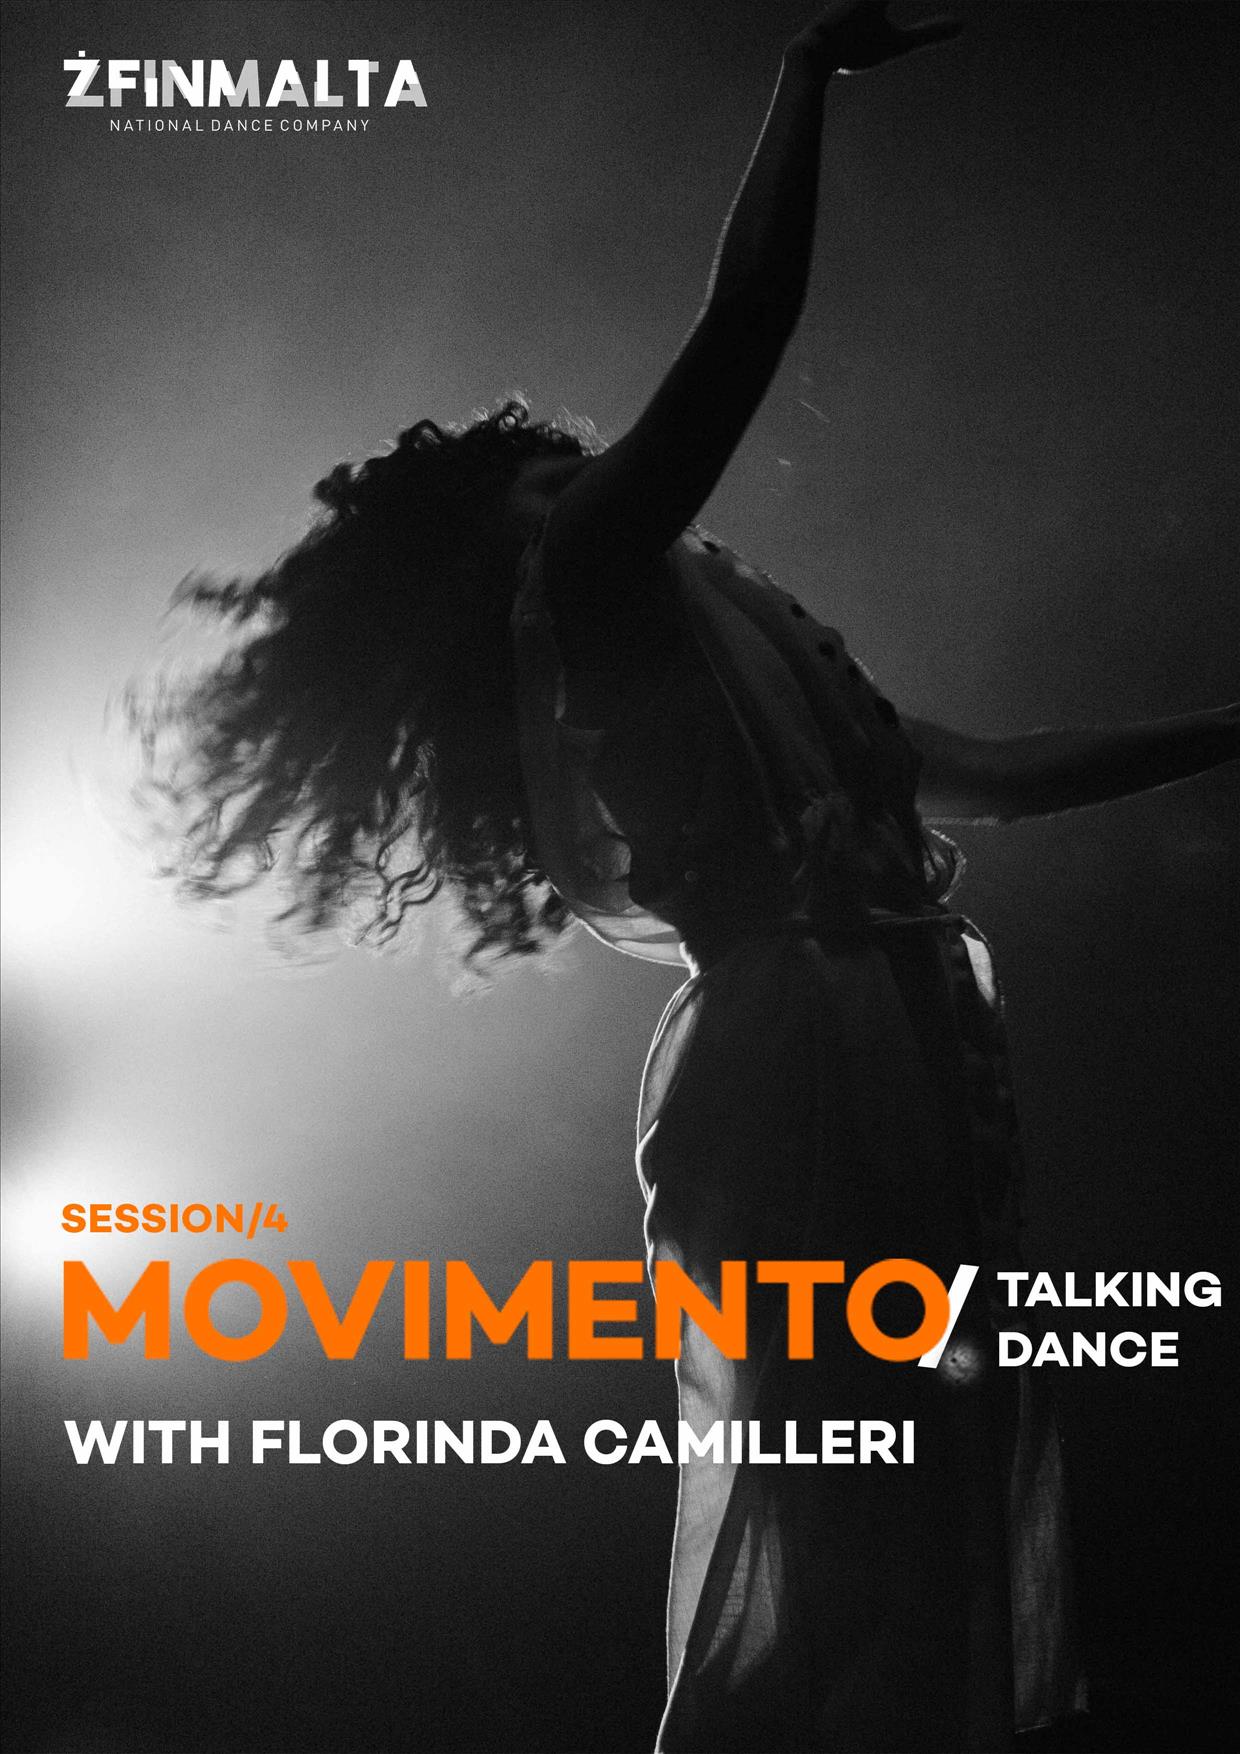 ŻfinMalta's Movimento with Florinda Camilleri: Becoming Posthuman by Moving with-in Public Space poster